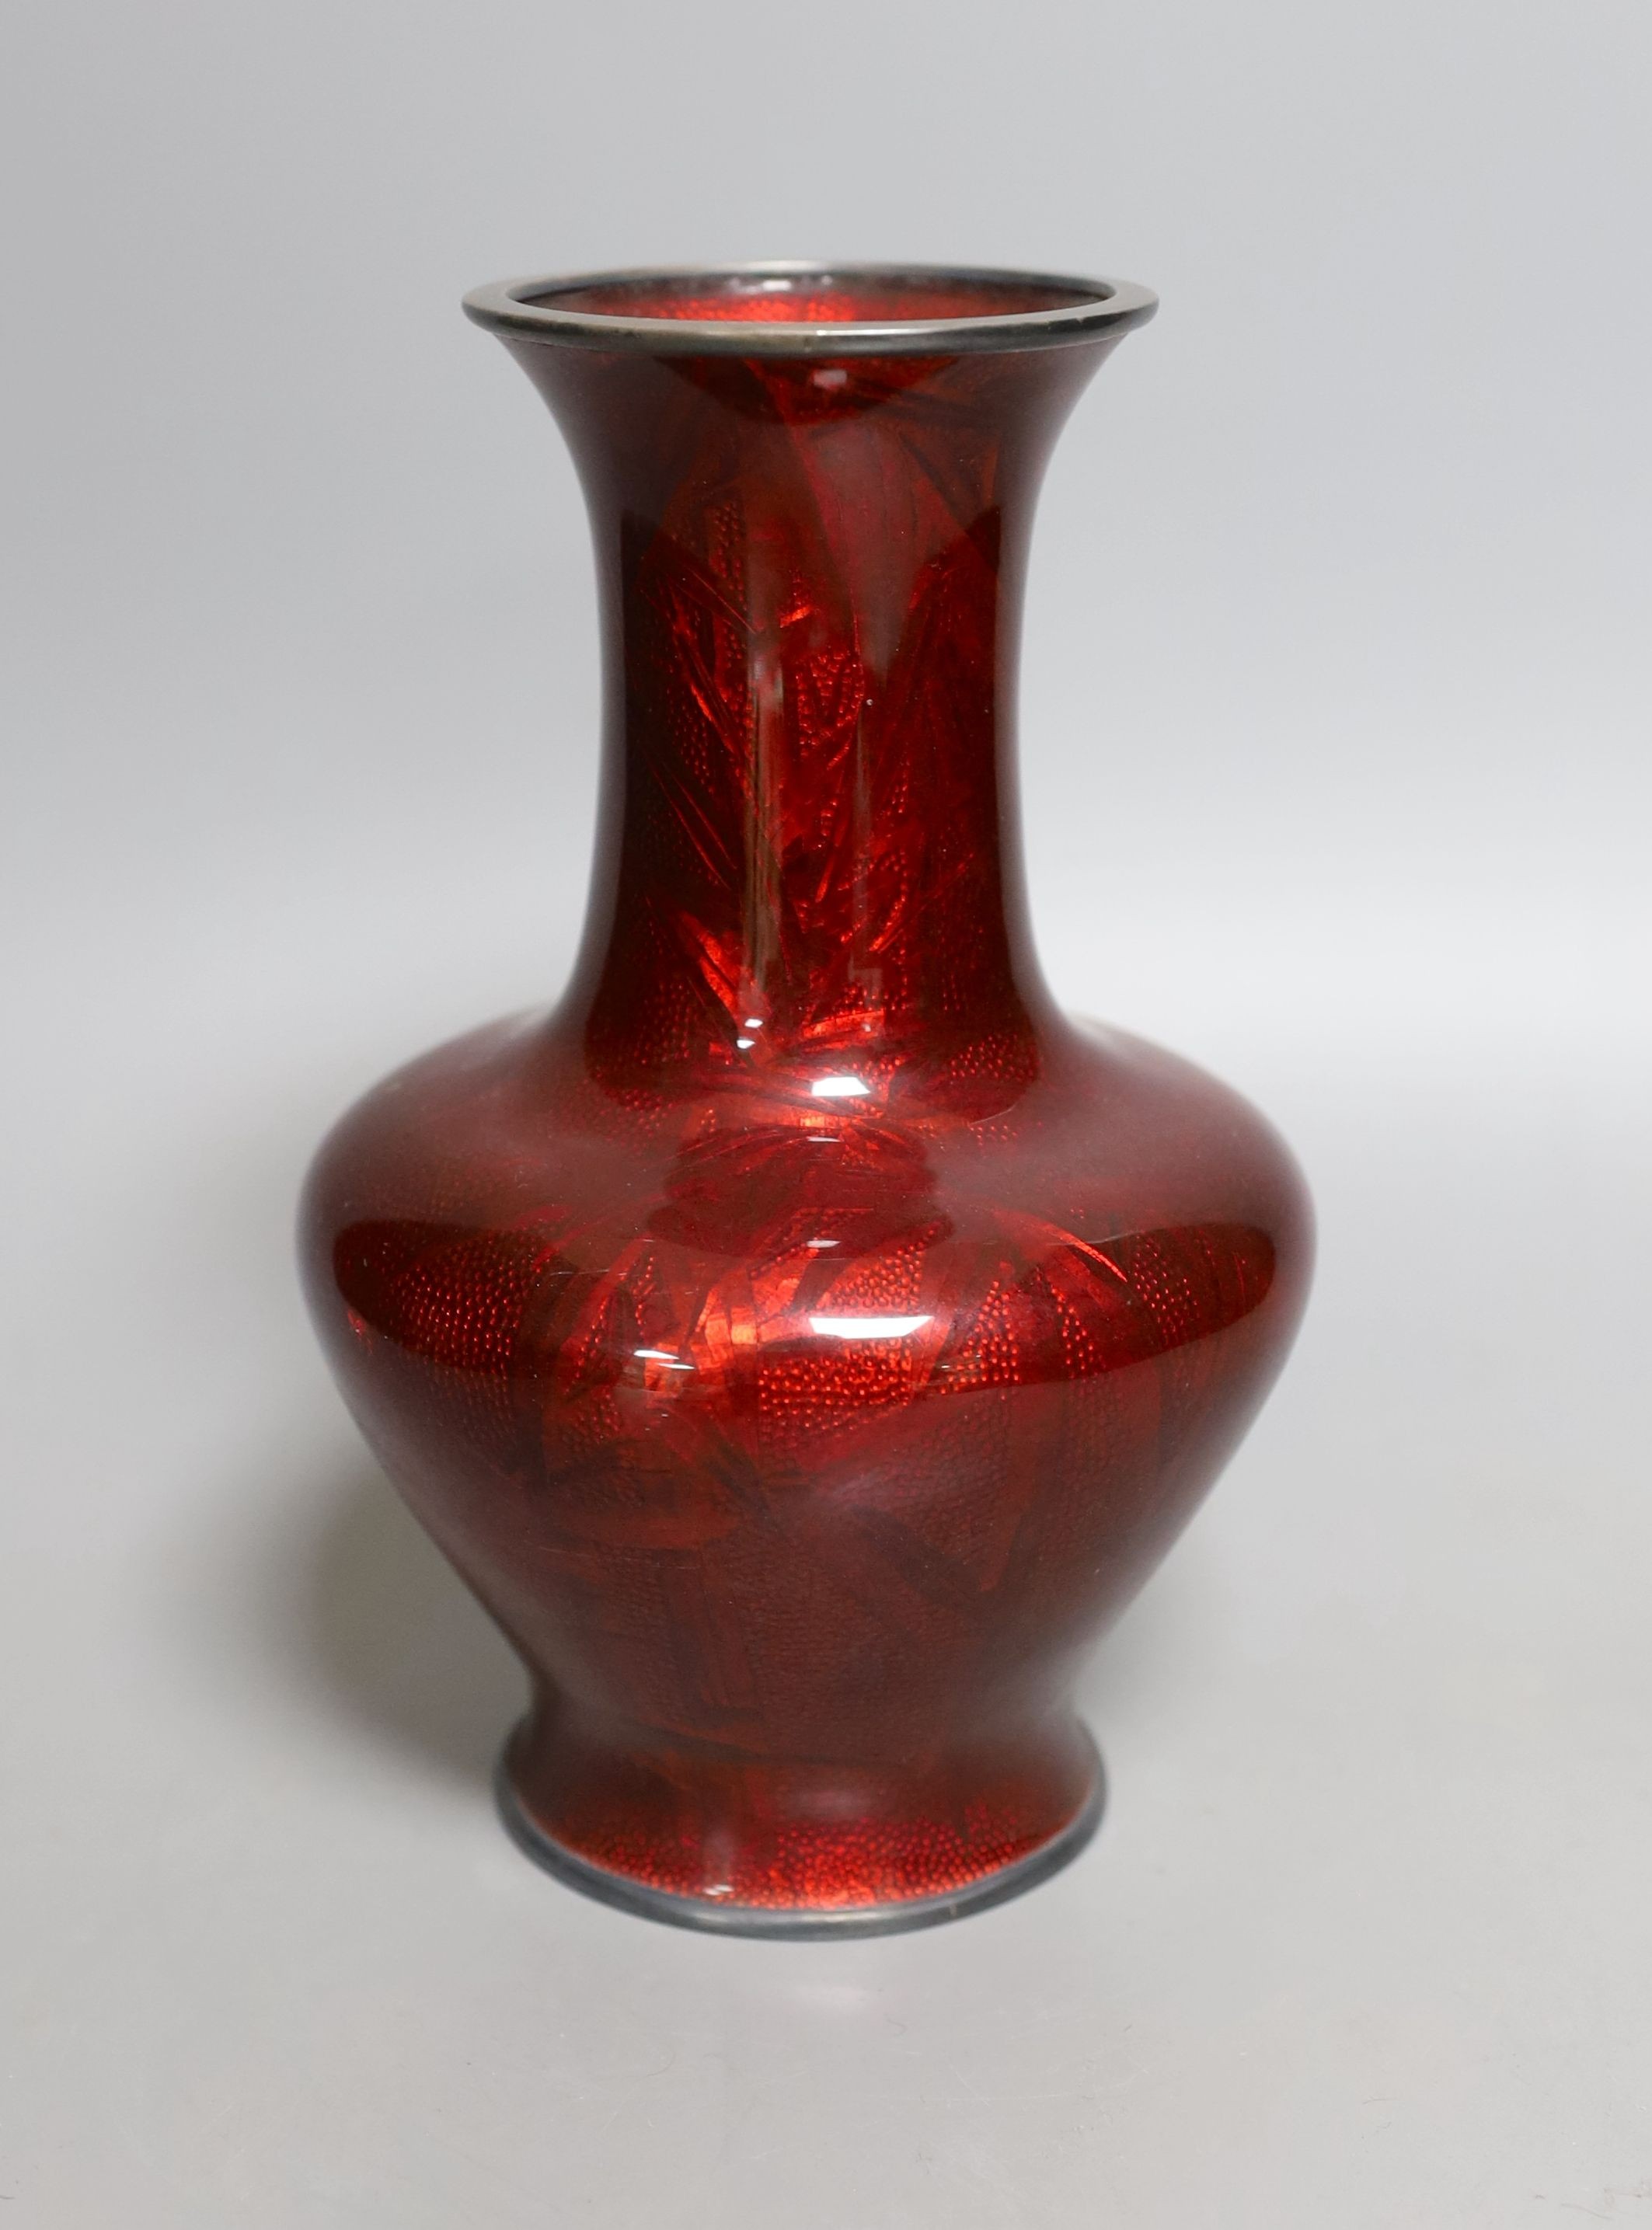 A Japanese red Ginbari enamel vase, by Ando, Taisho period, marked to base - 19cm tall, probably silver rimmed